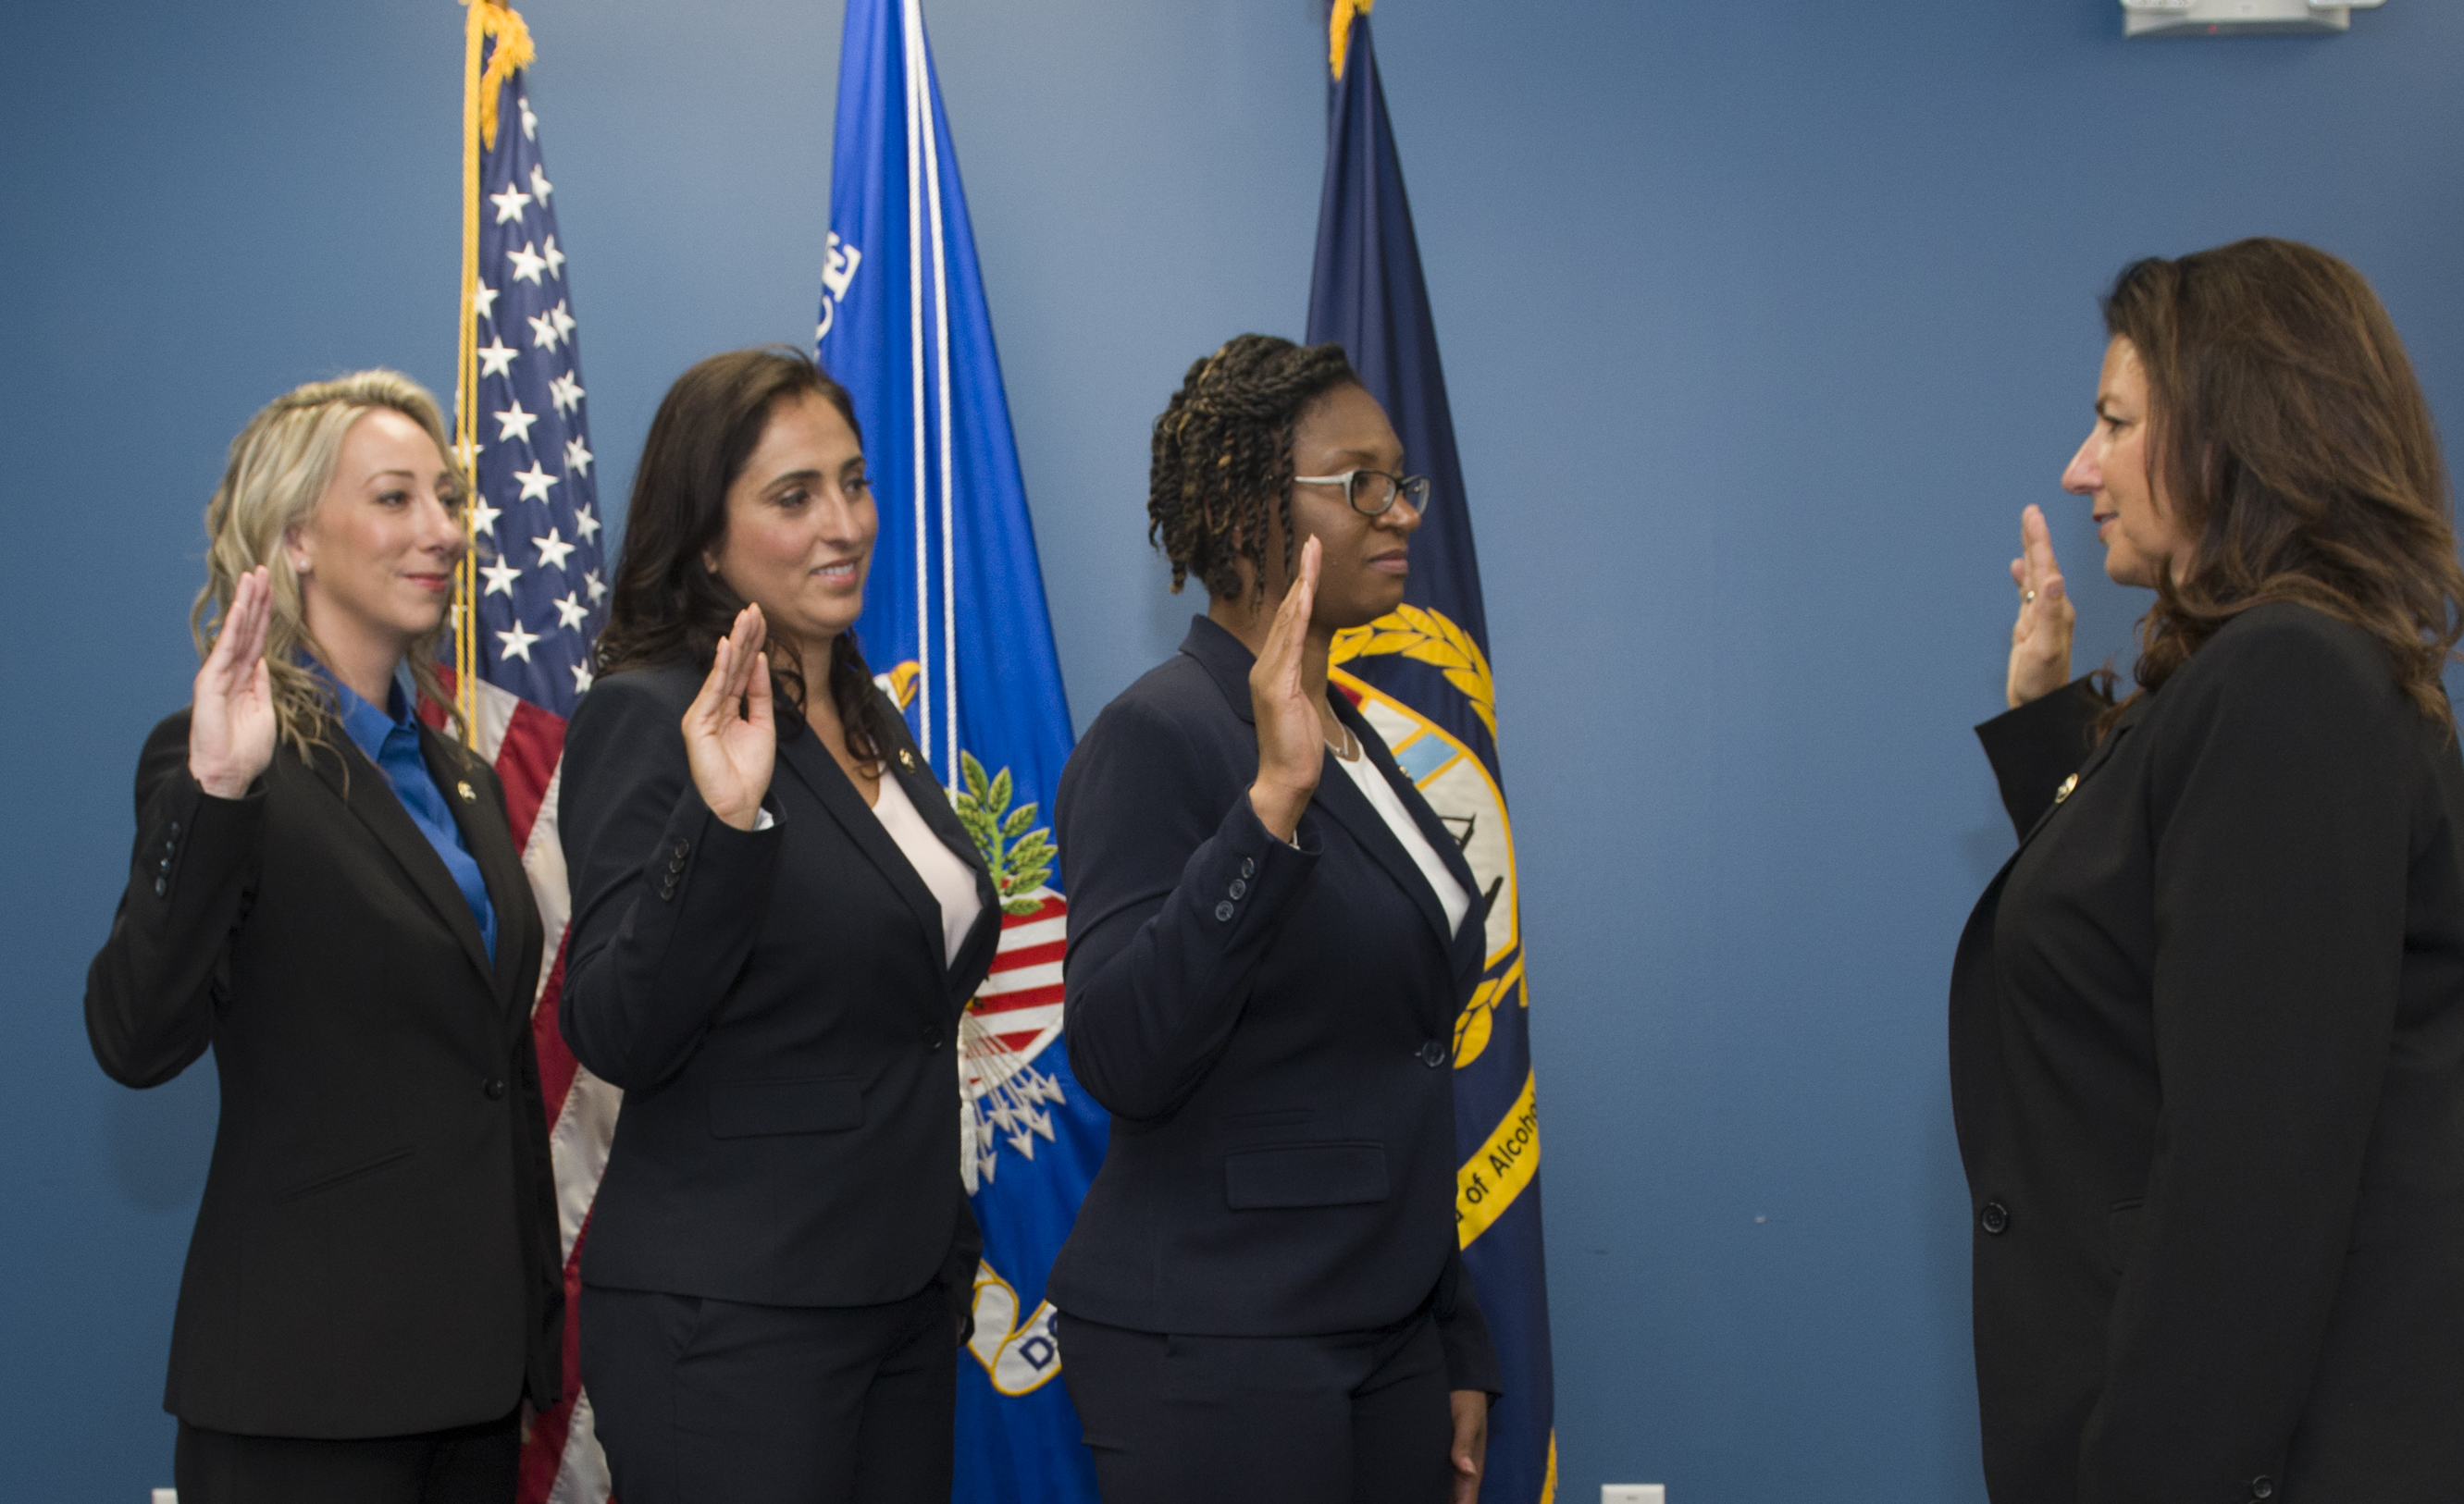 New special agents being sworn in